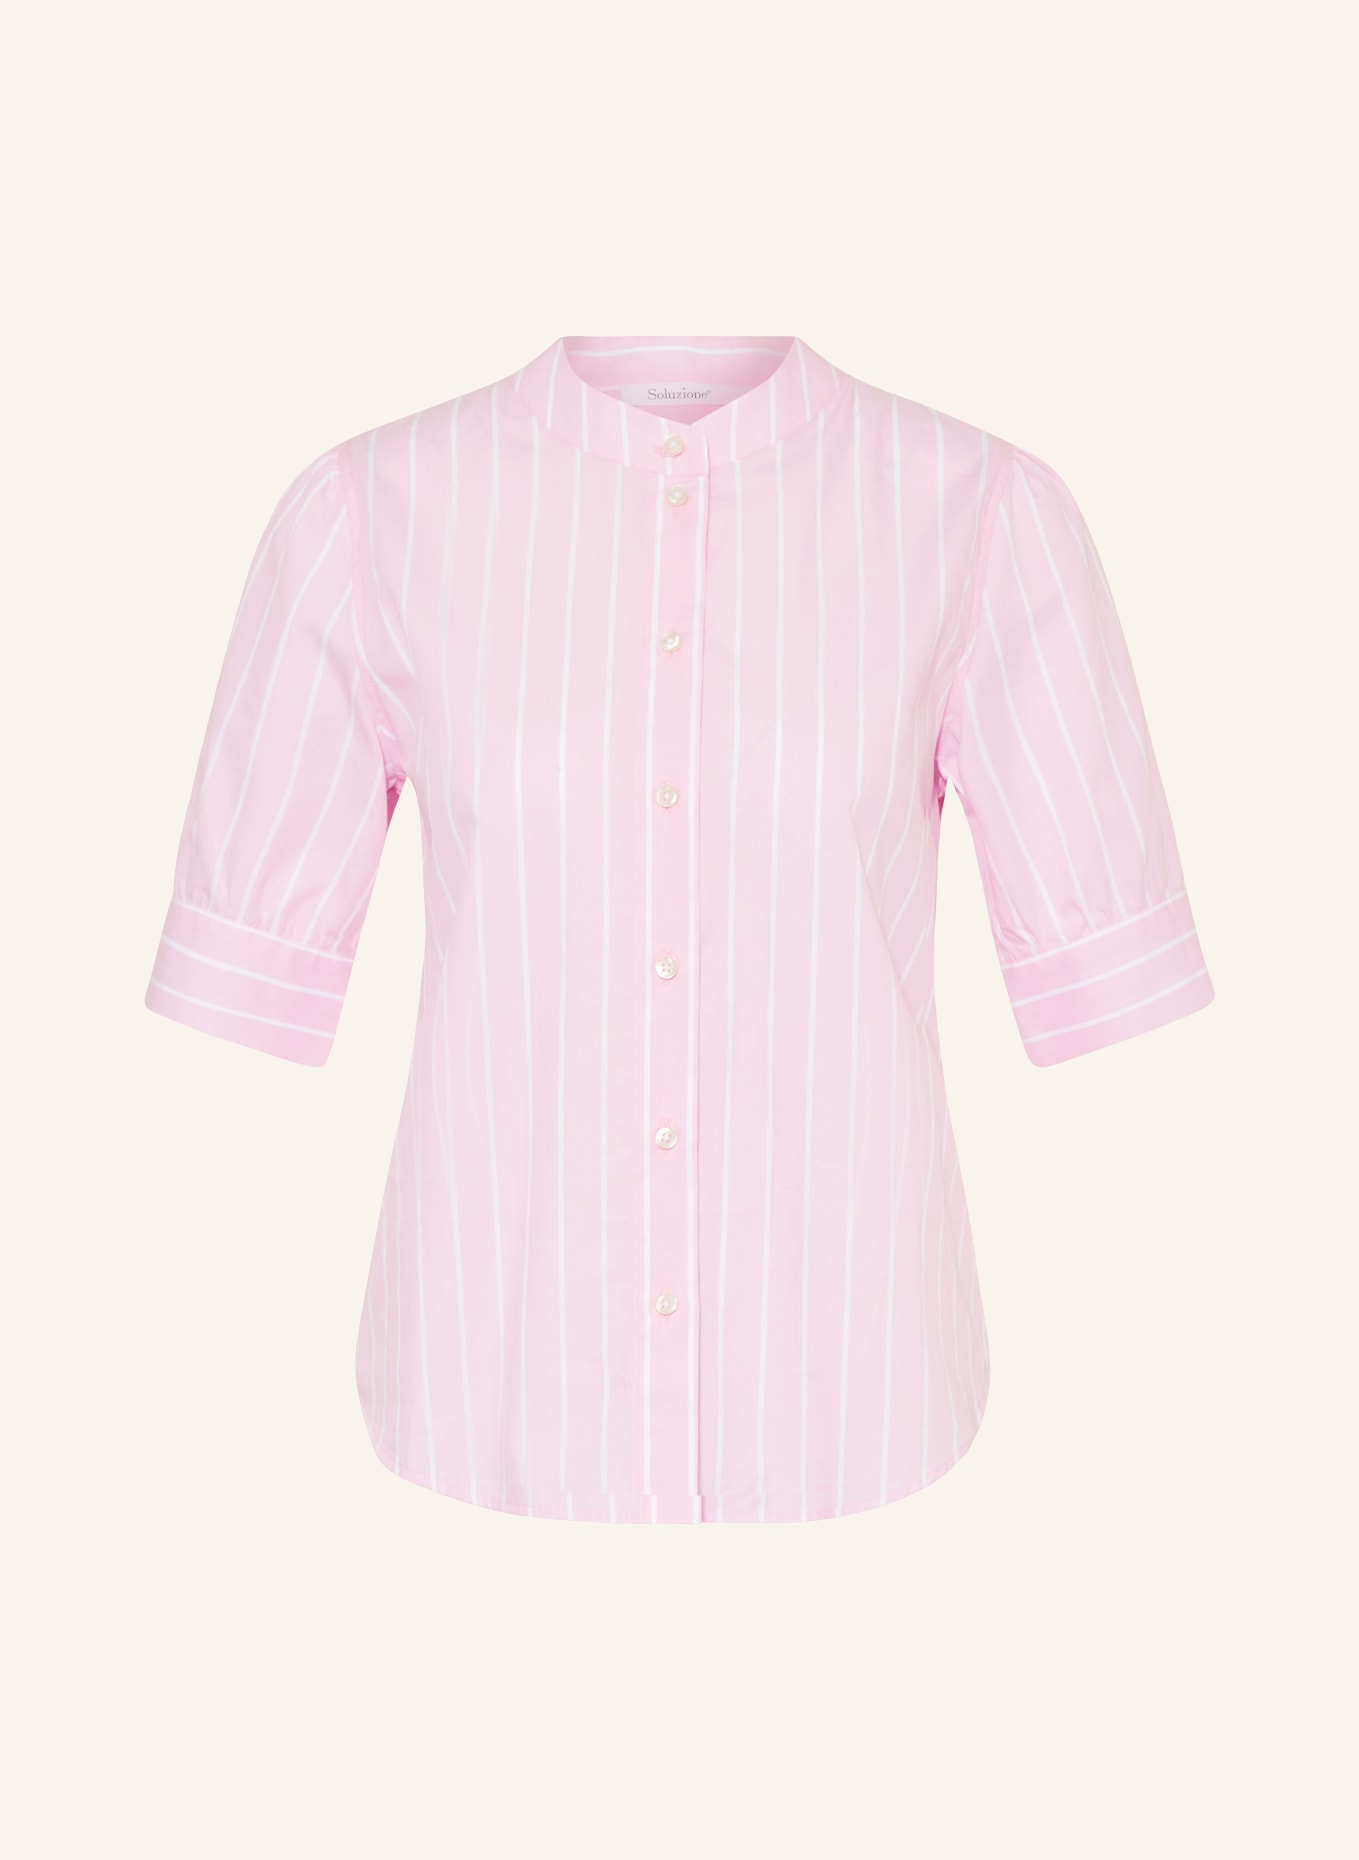 Soluzione Shirt blouse, Color: PINK/ WHITE (Image 1)